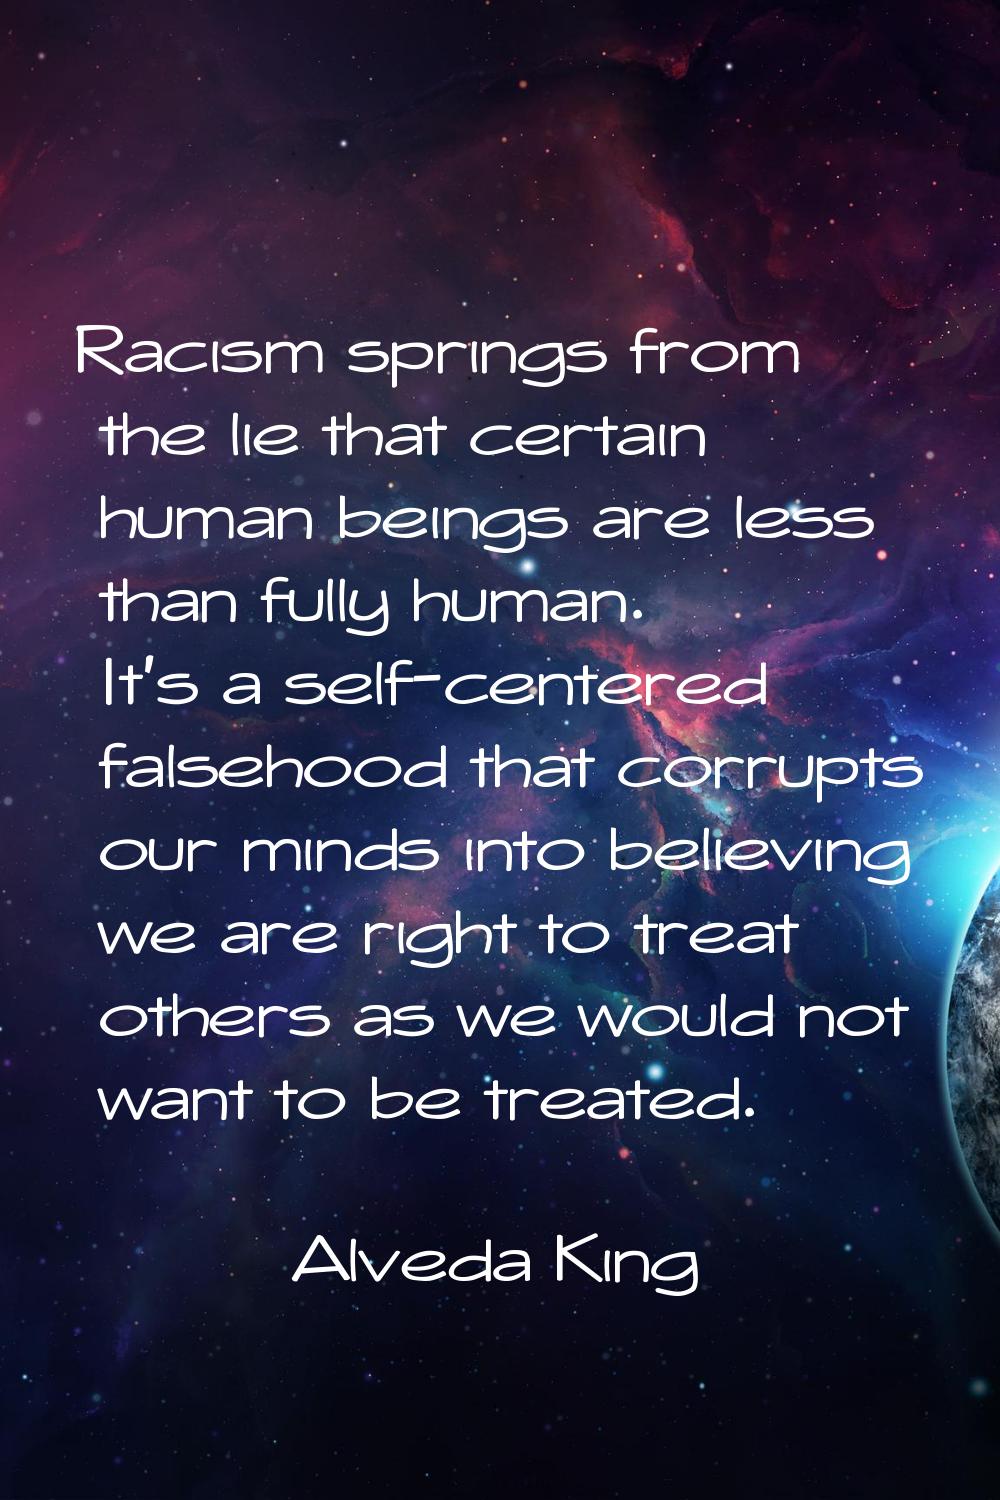 Racism springs from the lie that certain human beings are less than fully human. It's a self-center